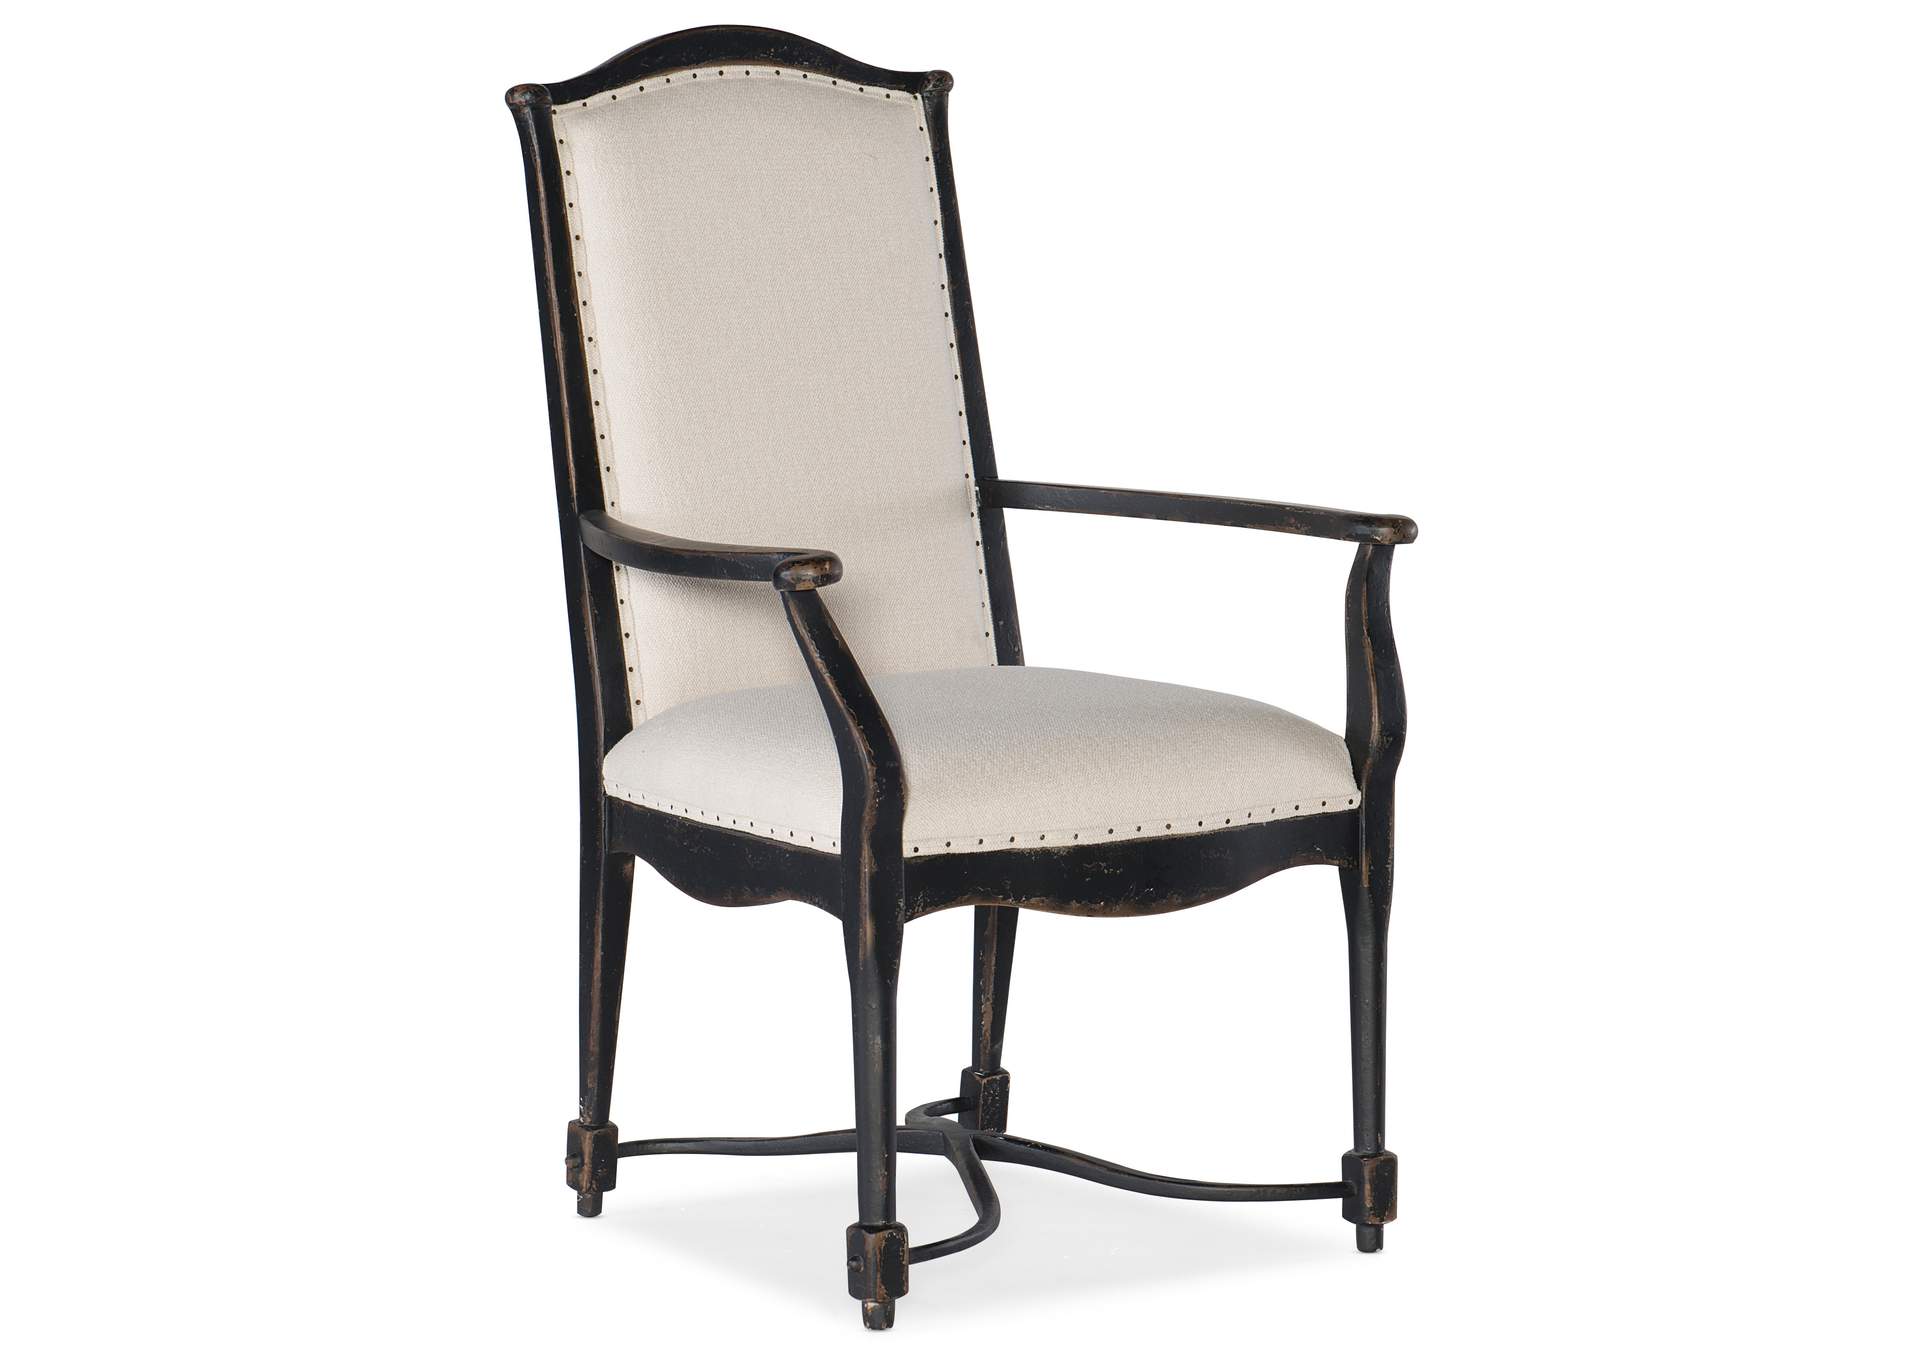 Ciao Bella Upholstered Back Arm Chair - 2 Per Carton - Price Ea